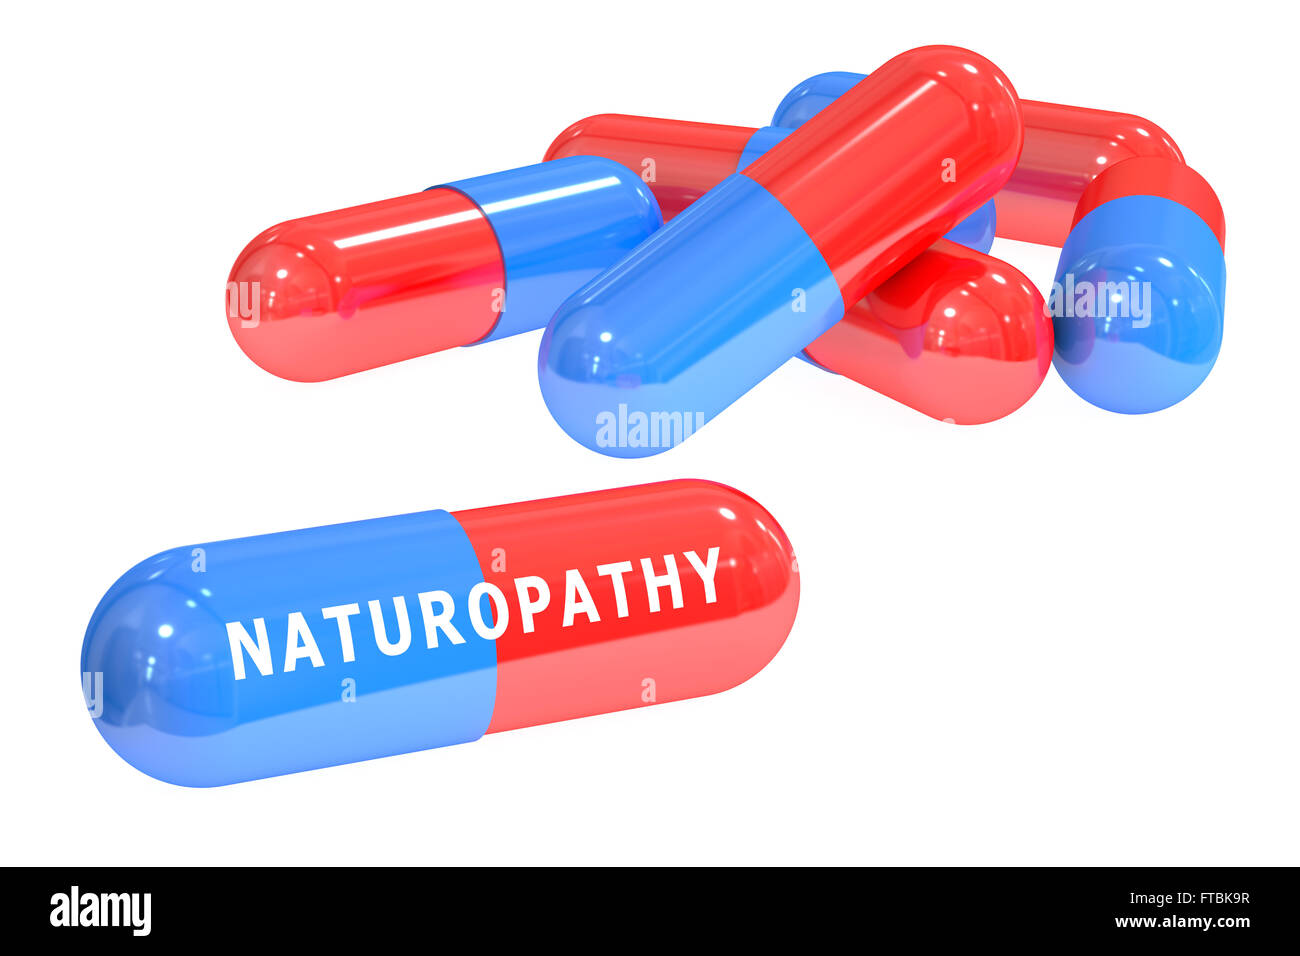 Naturopathy pills 3D rendering isolated on white background Stock Photo